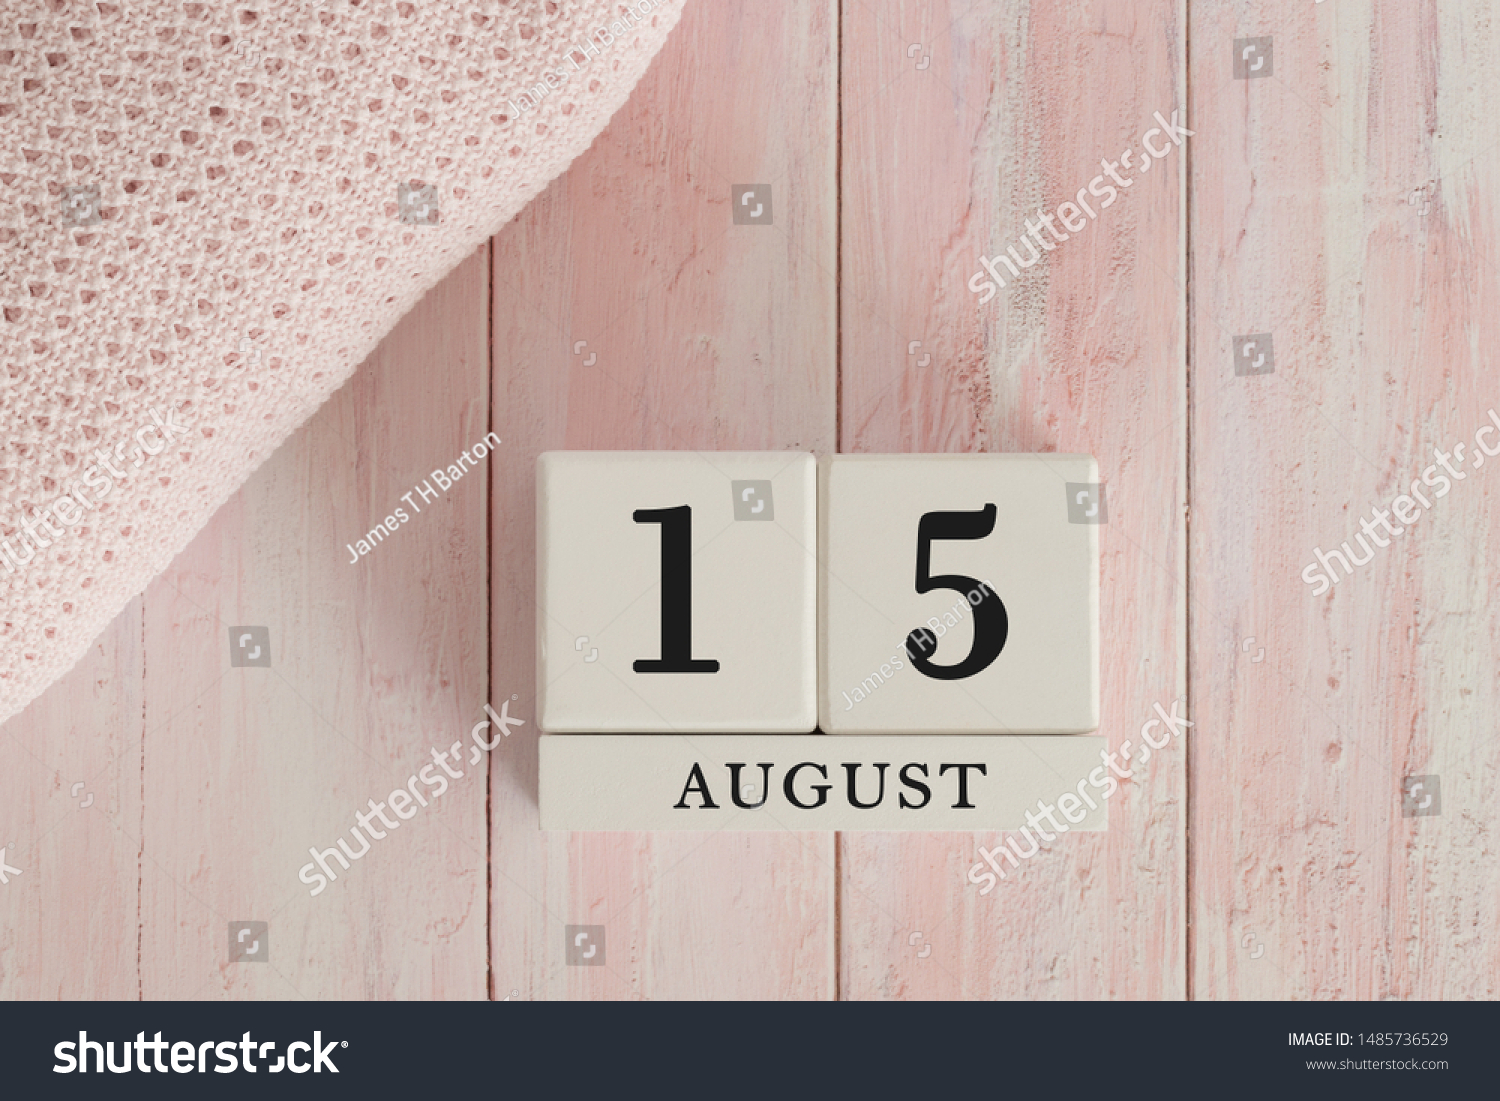 15 August Date on Cubes. Date on painted pink wood, next to baby blanket. Theme of baby due dates and birth dates. #1485736529